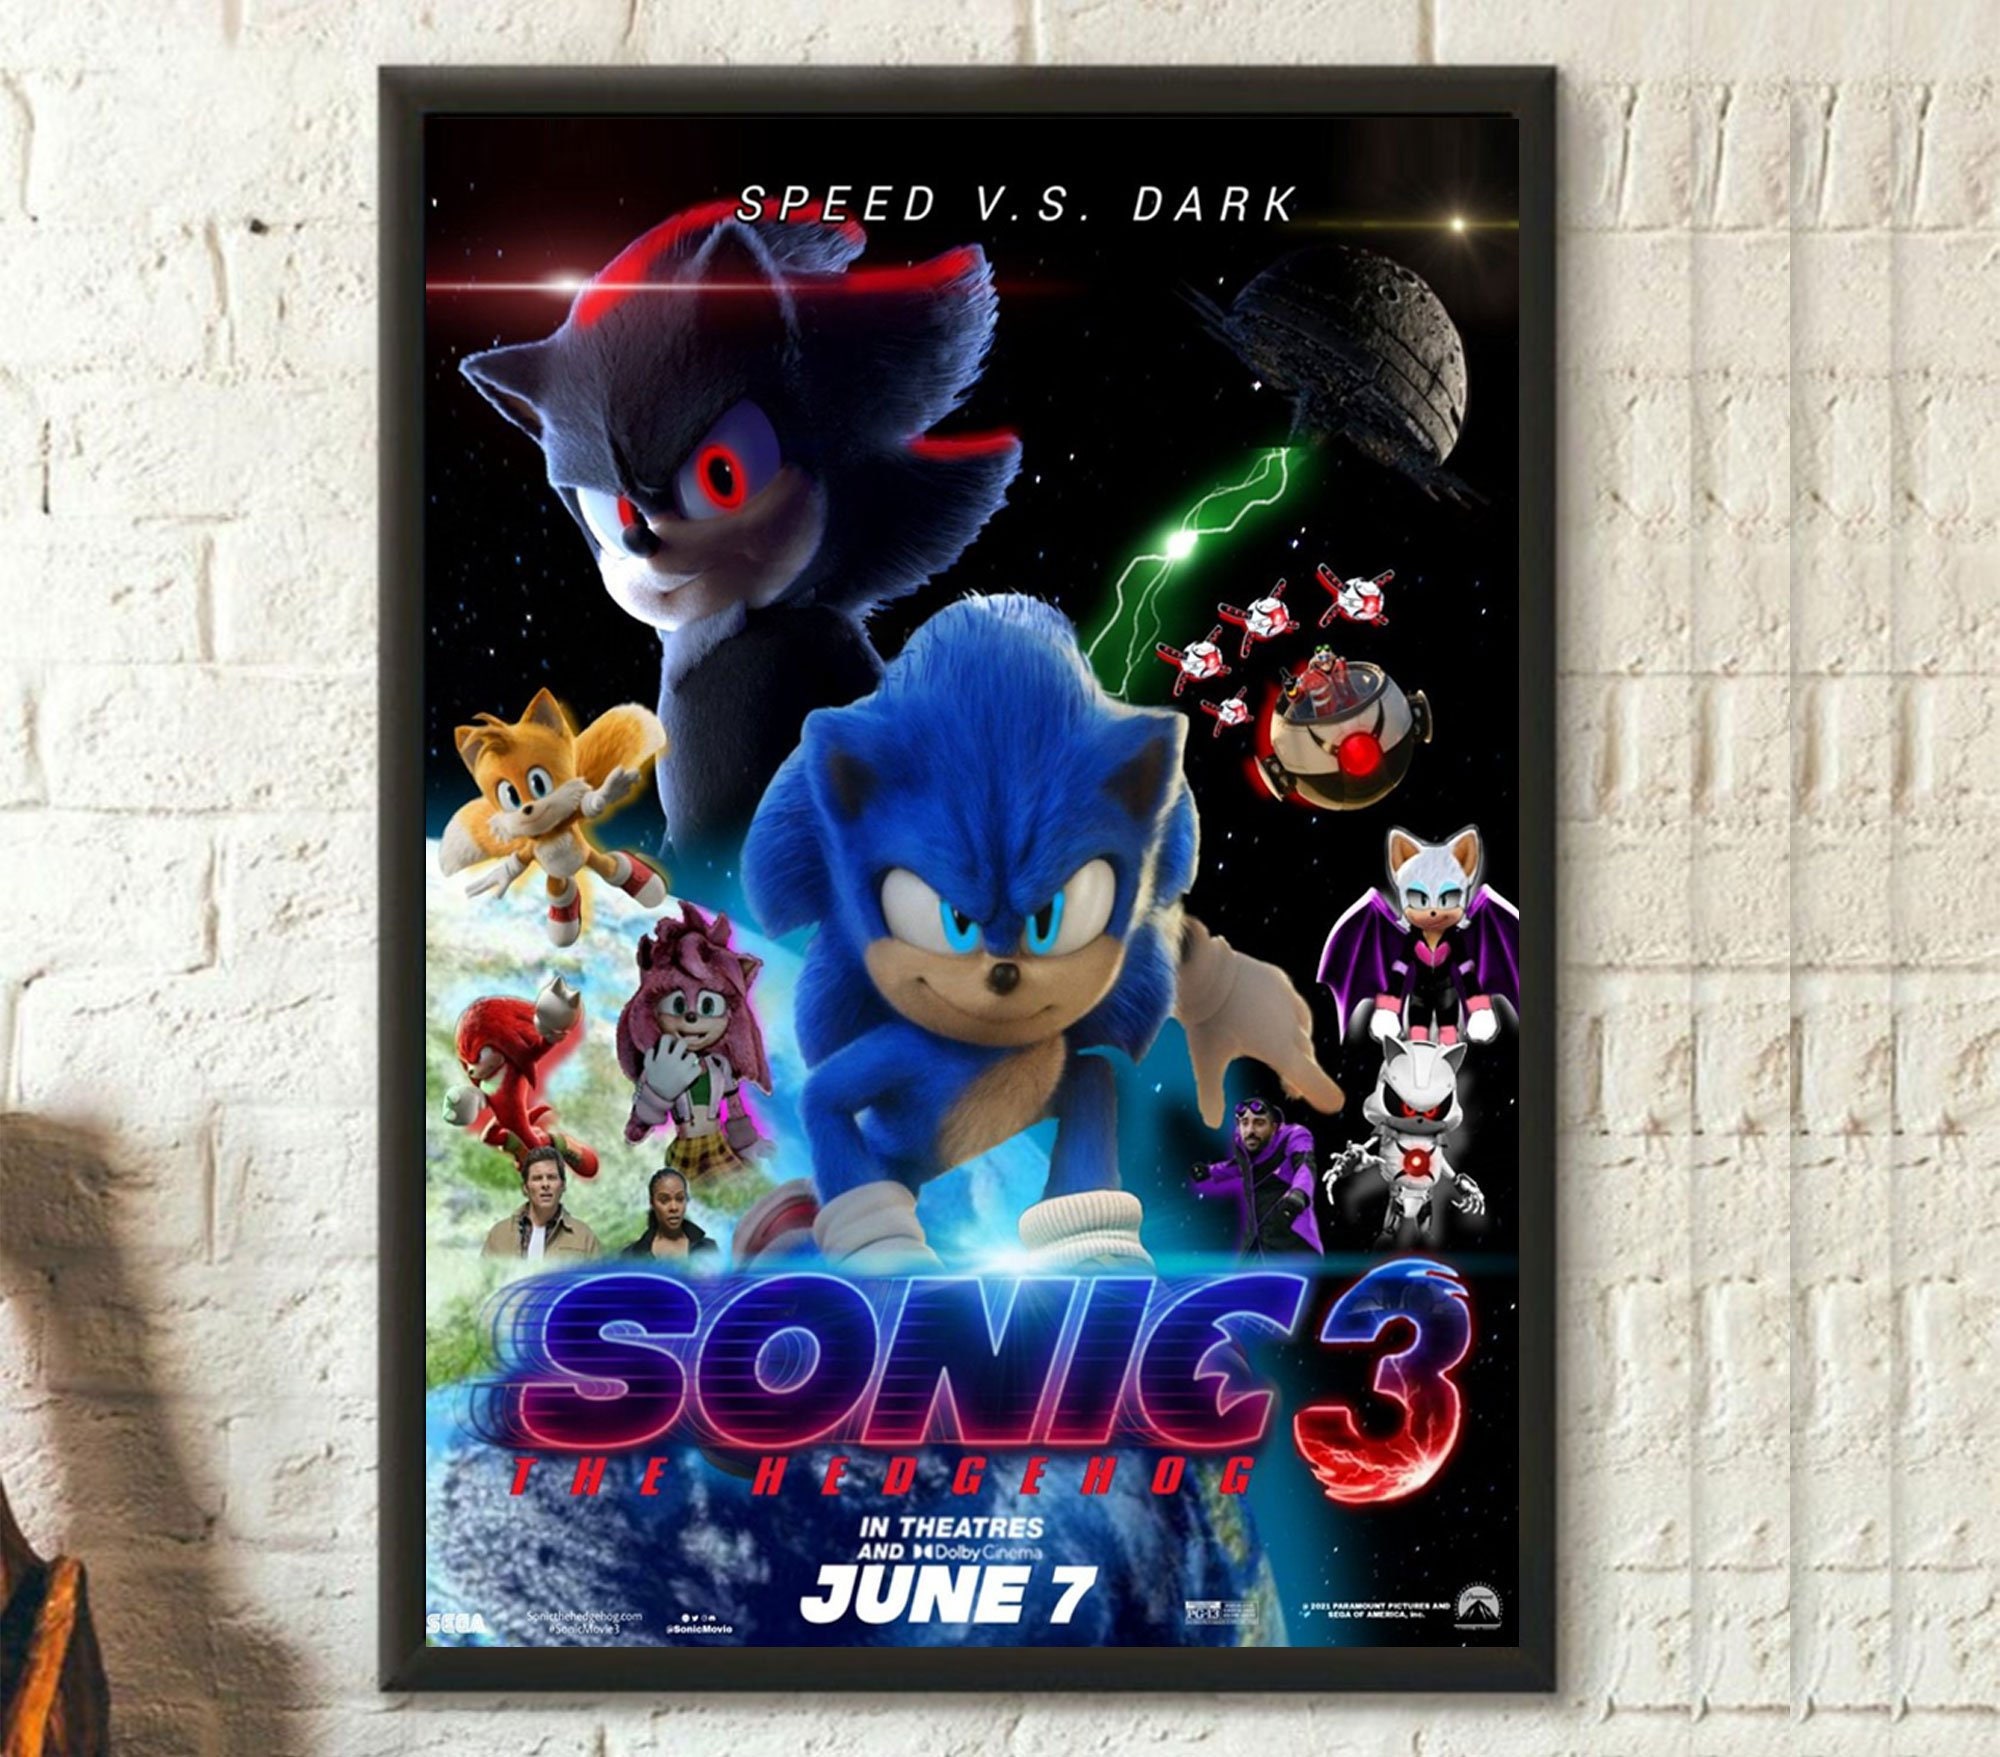 Sonic The Hedgehog 3 Poster, Sonic The Hedgehog 3 Movie Poster,